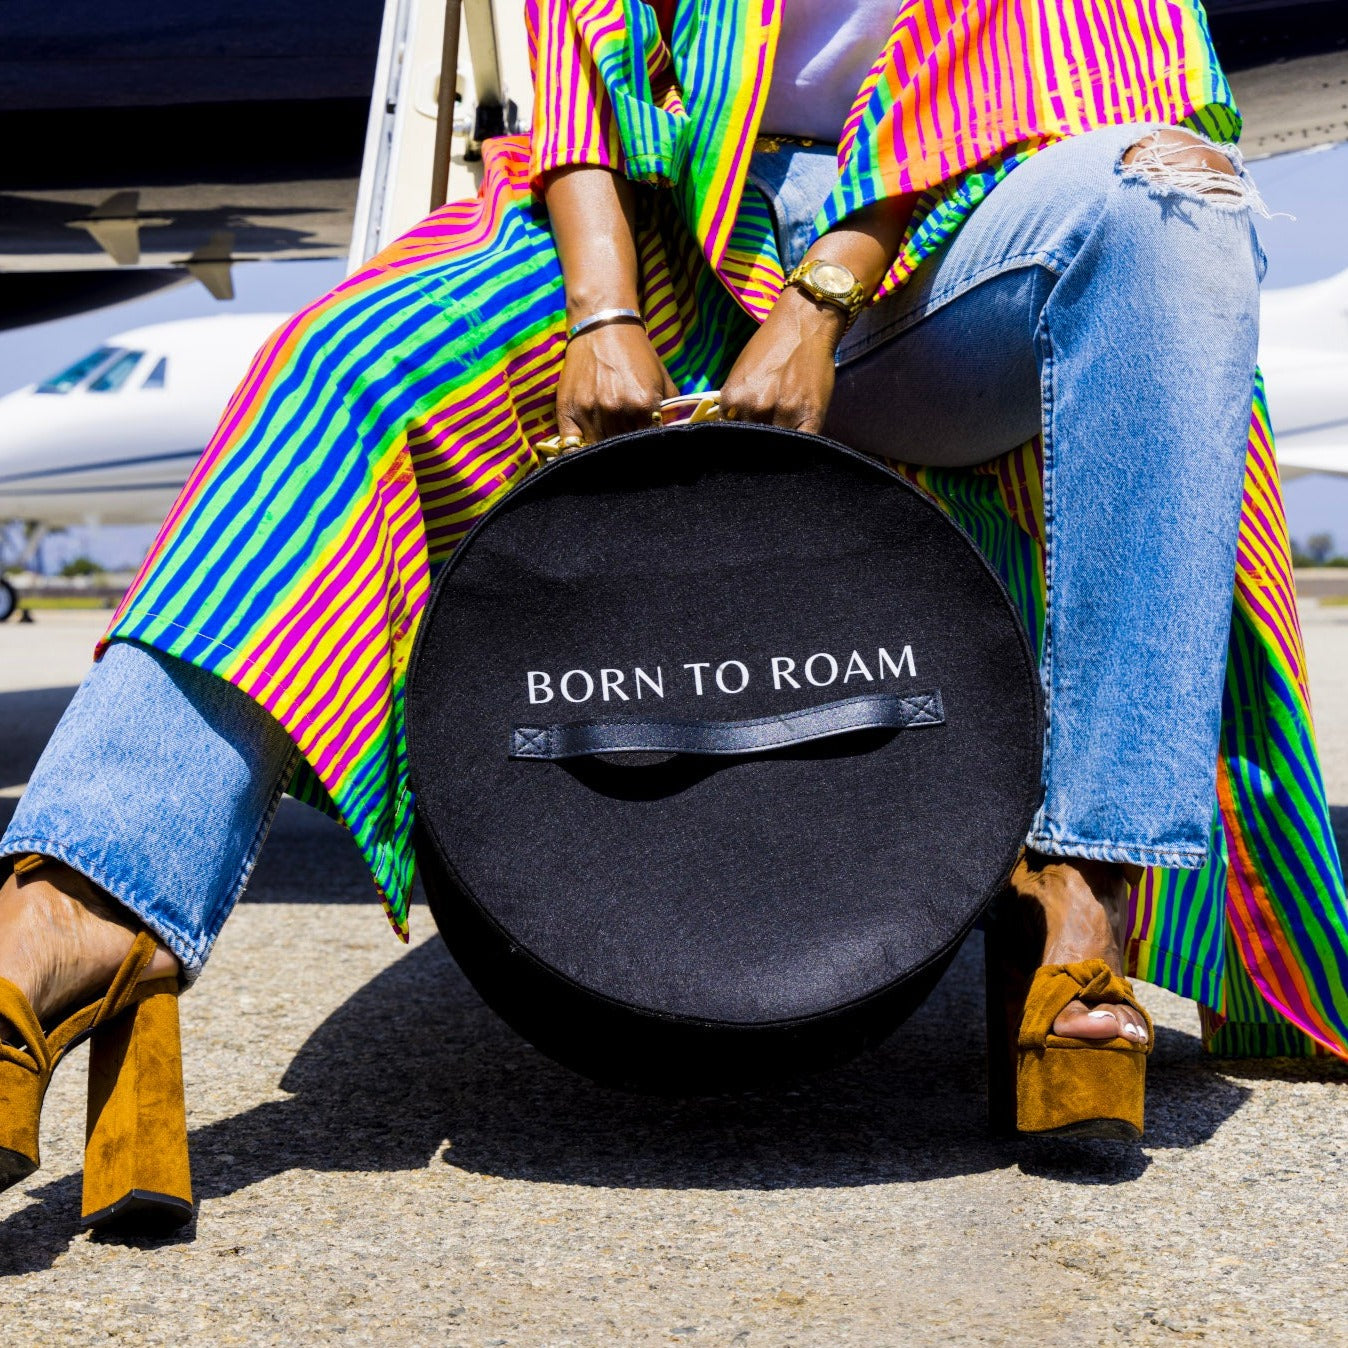 Travel with ease using Born to Roam hat luggage